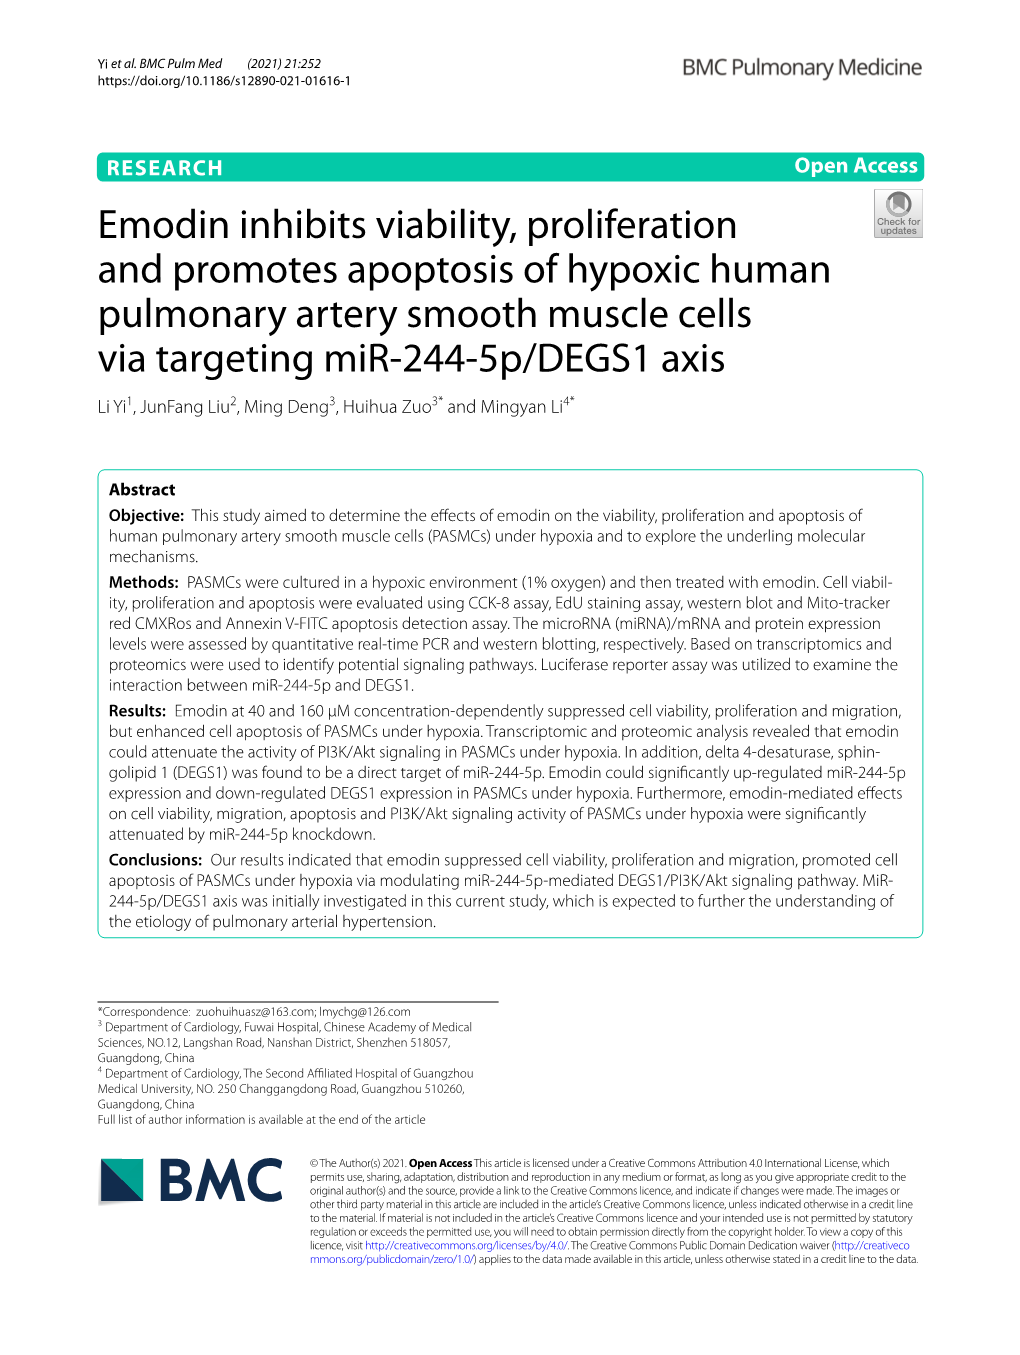 Emodin Inhibits Viability, Proliferation and Promotes Apoptosis of Hypoxic Human Pulmonary Artery Smooth Muscle Cells Via Target